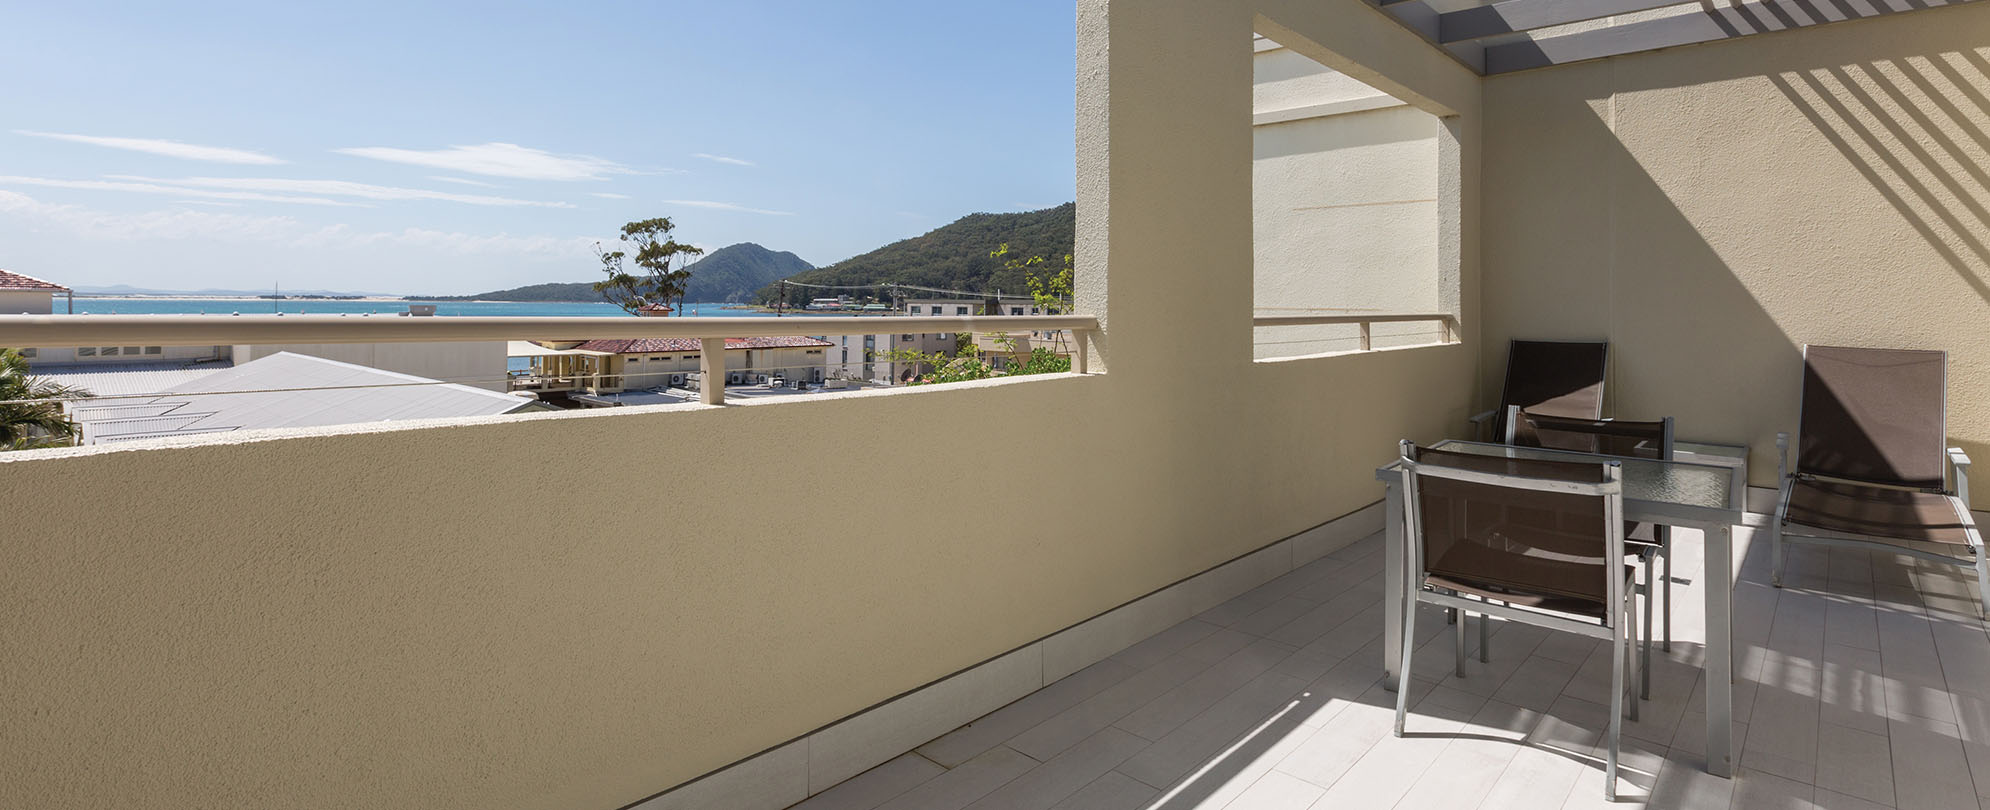 A balcony with a view from a 2-bedroom deluxe suite at Club Wyndham Shoal Bay.